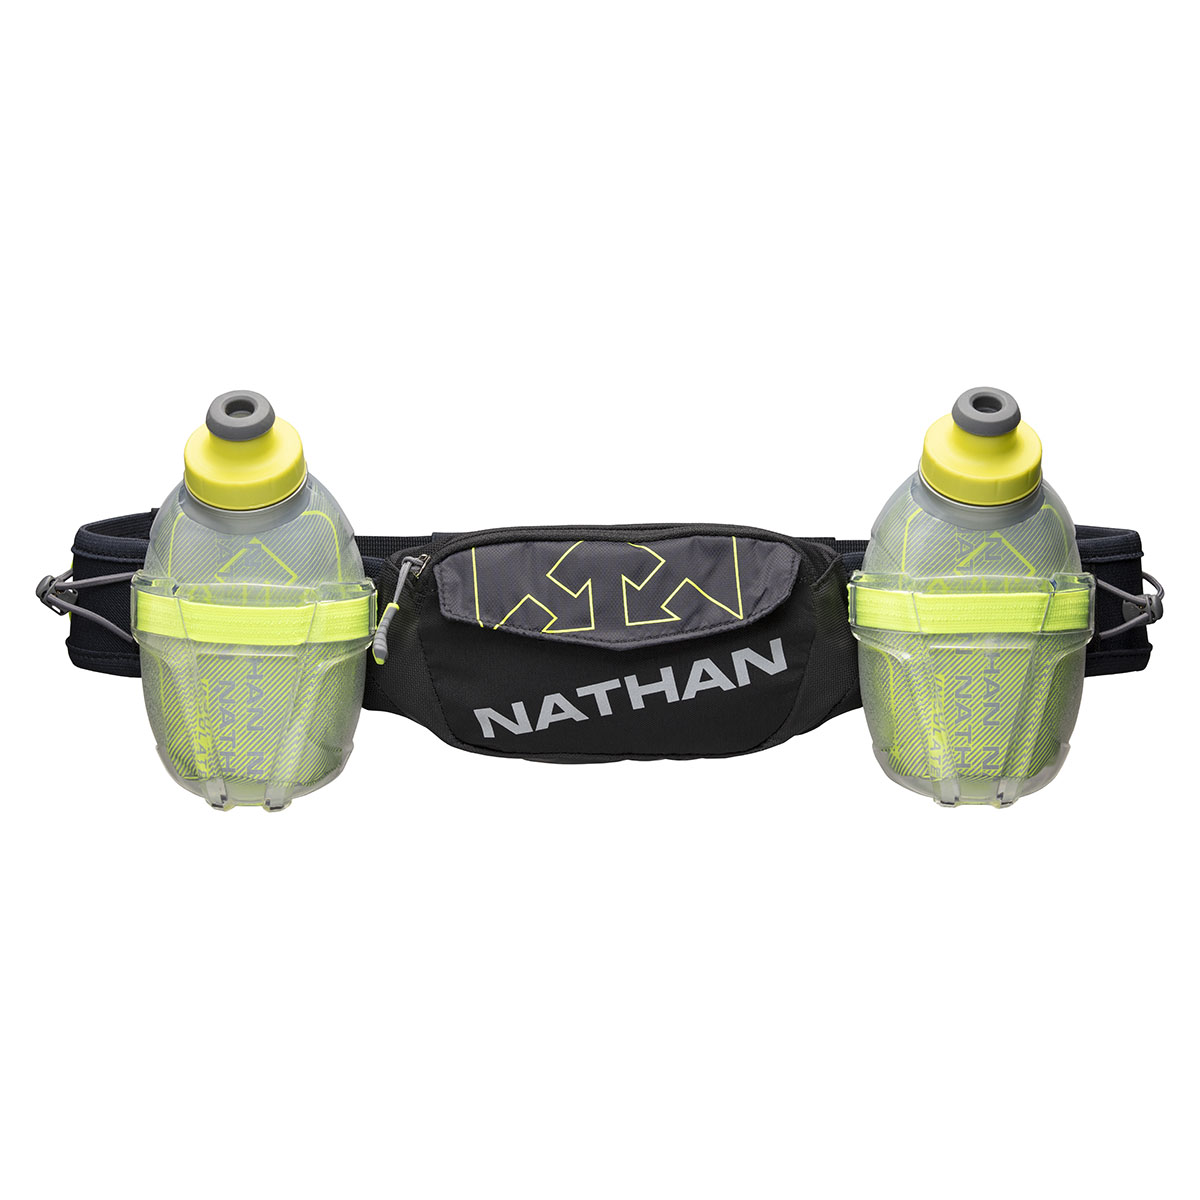 Nathan Trail Mix Plus 2 Insulated Hydration Belt, , large image number null